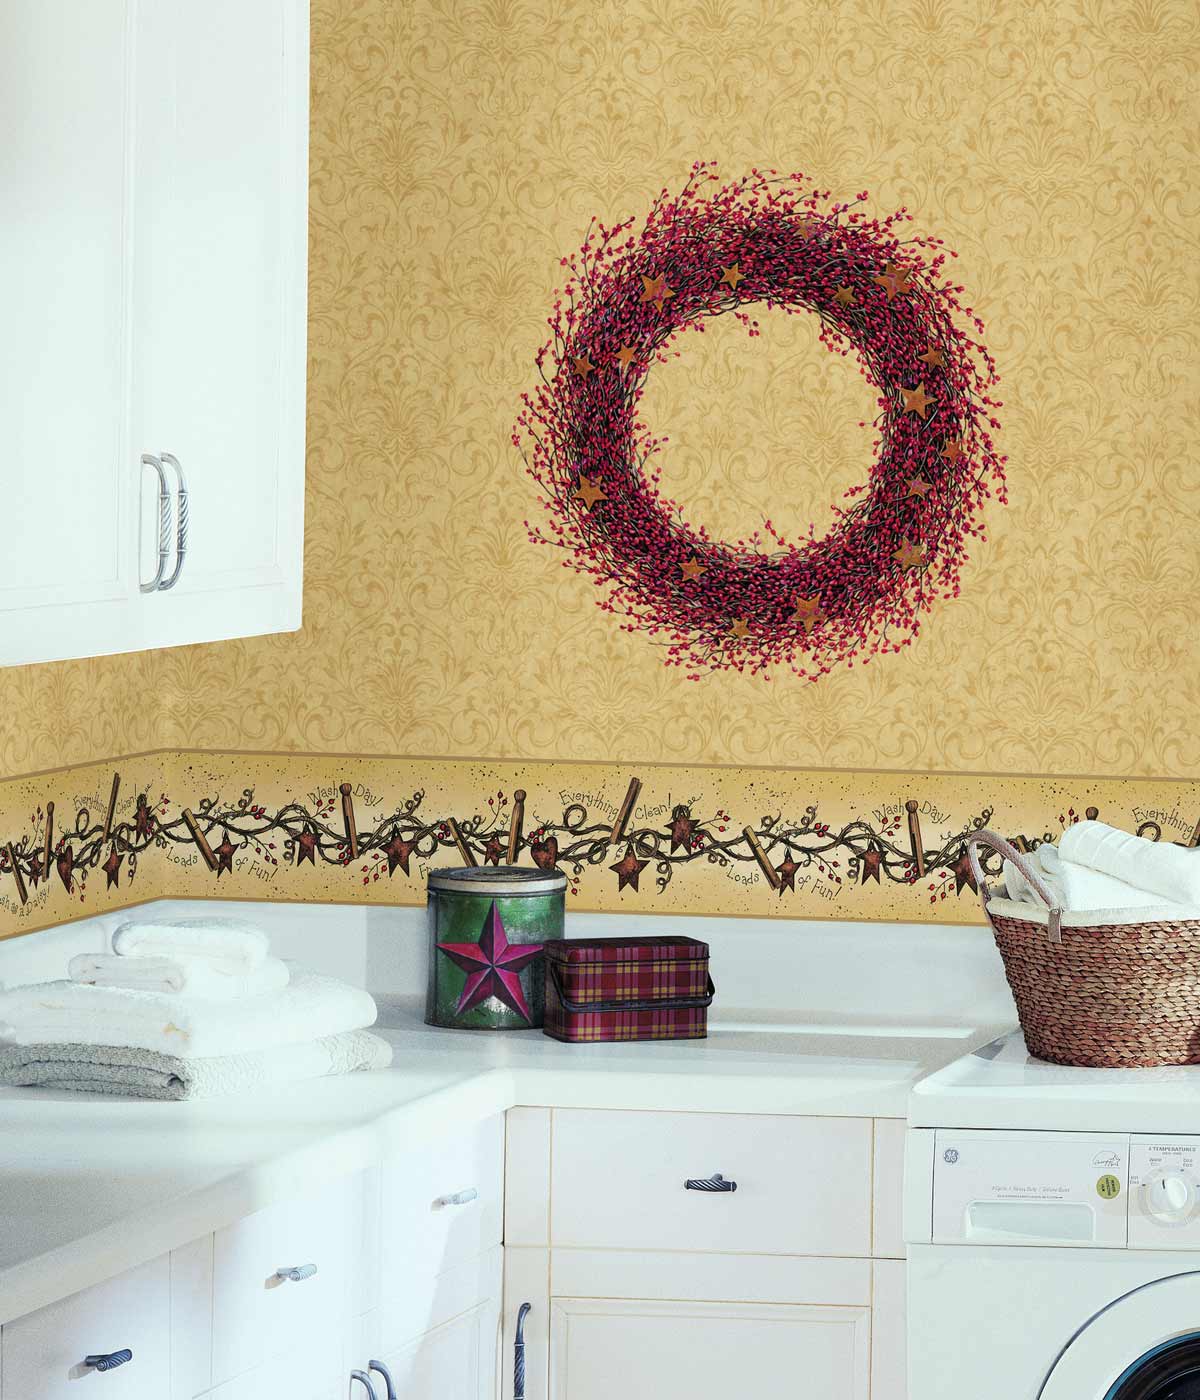 Wallpaper In The Laundry Room - Wallpaper Installation Guide